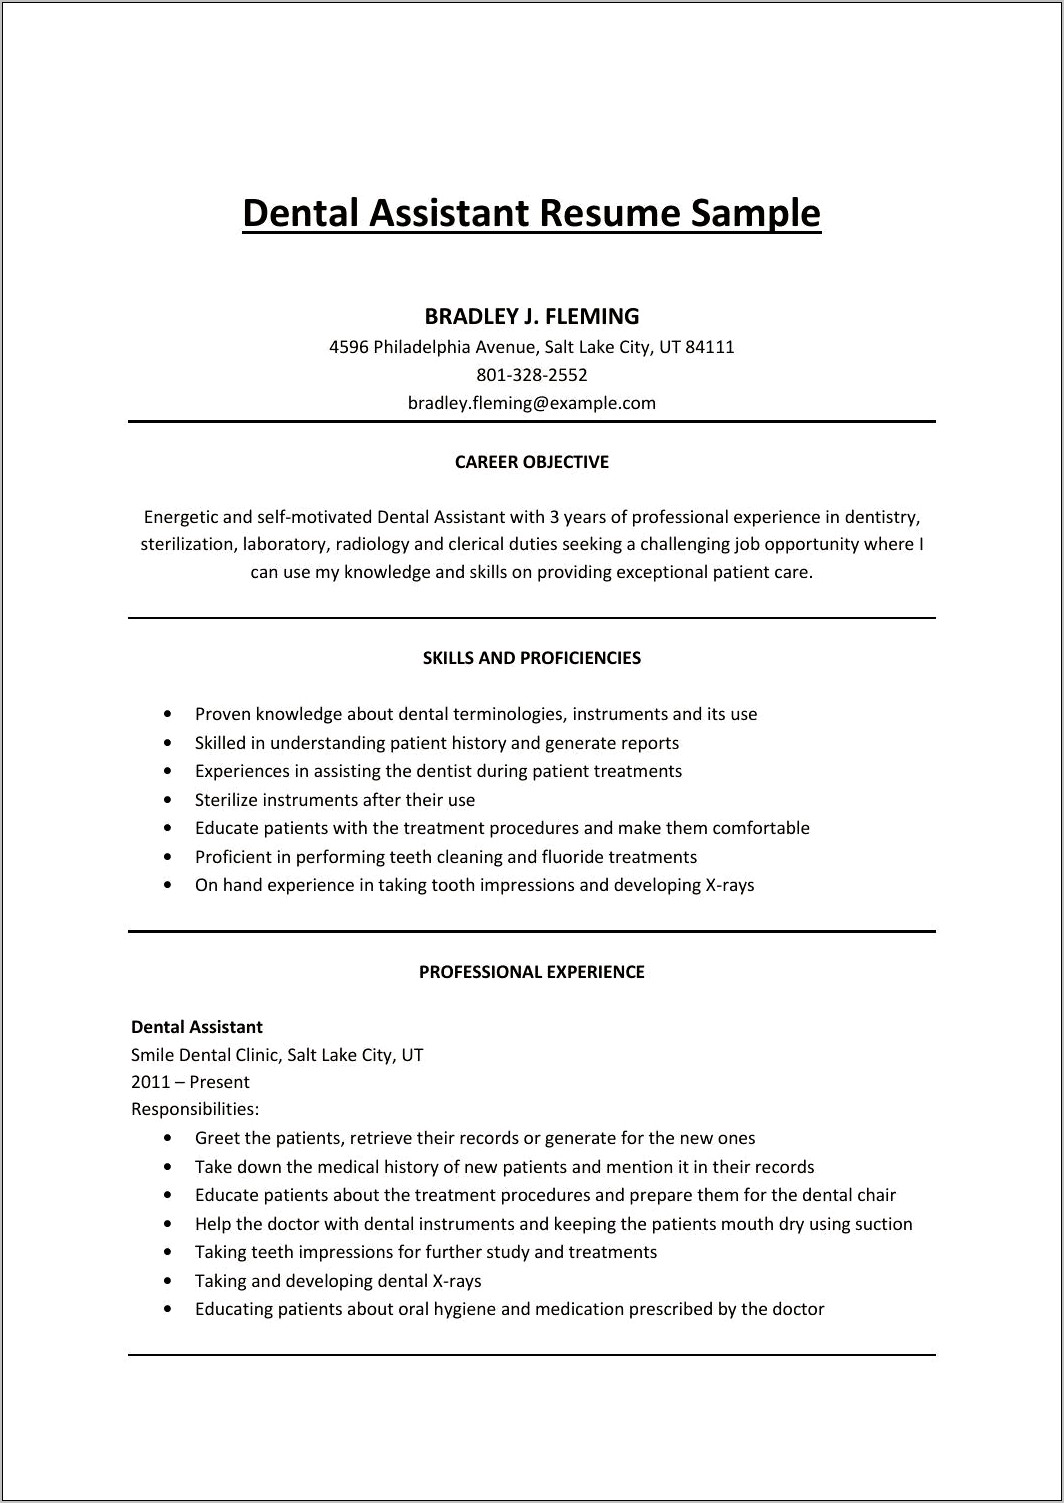 An Example Of A Dental Assistan Resume